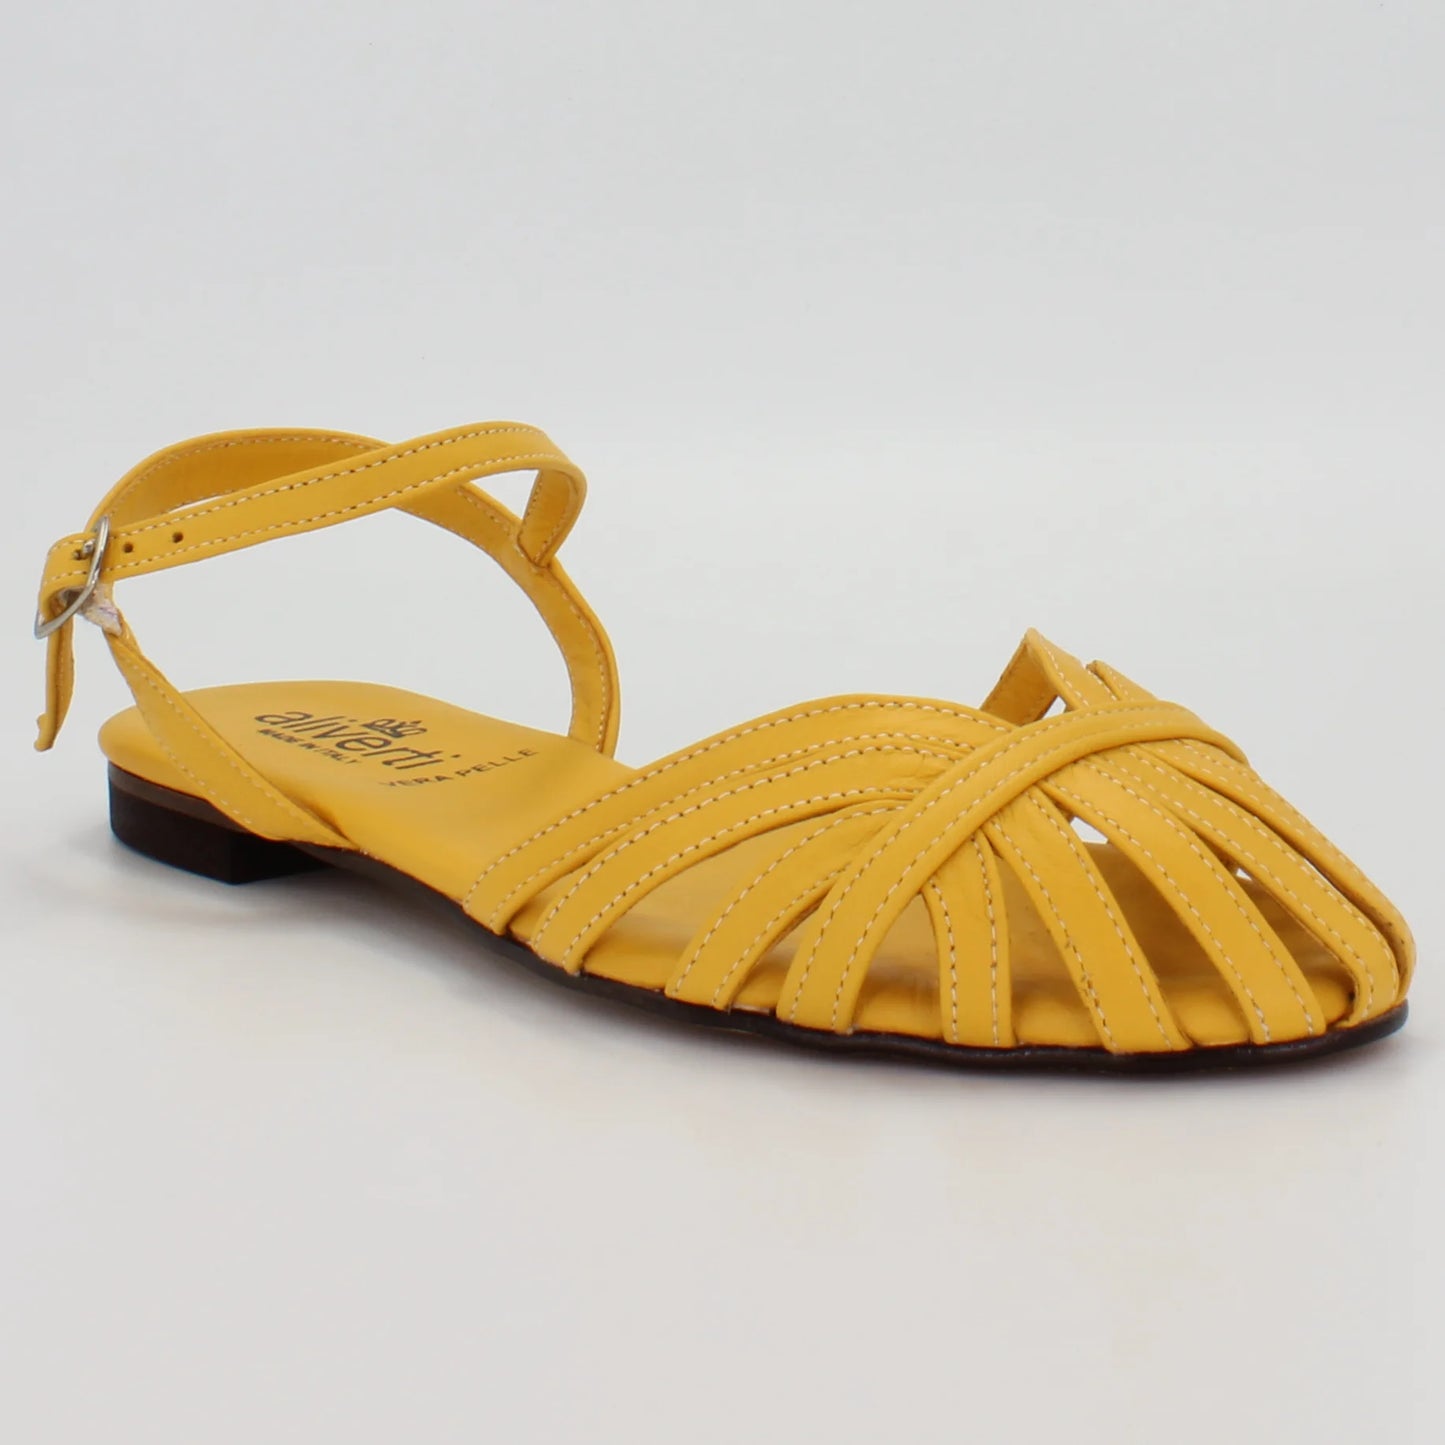 Shop Handmade Italian Leather sandal in giallo (G500) or browse our range of hand-made Italian shoes in leather or suede in-store at Aliverti Cape Town, or shop online. We deliver in South Africa & offer multiple payment plans as well as accept multiple safe & secure payment methods.